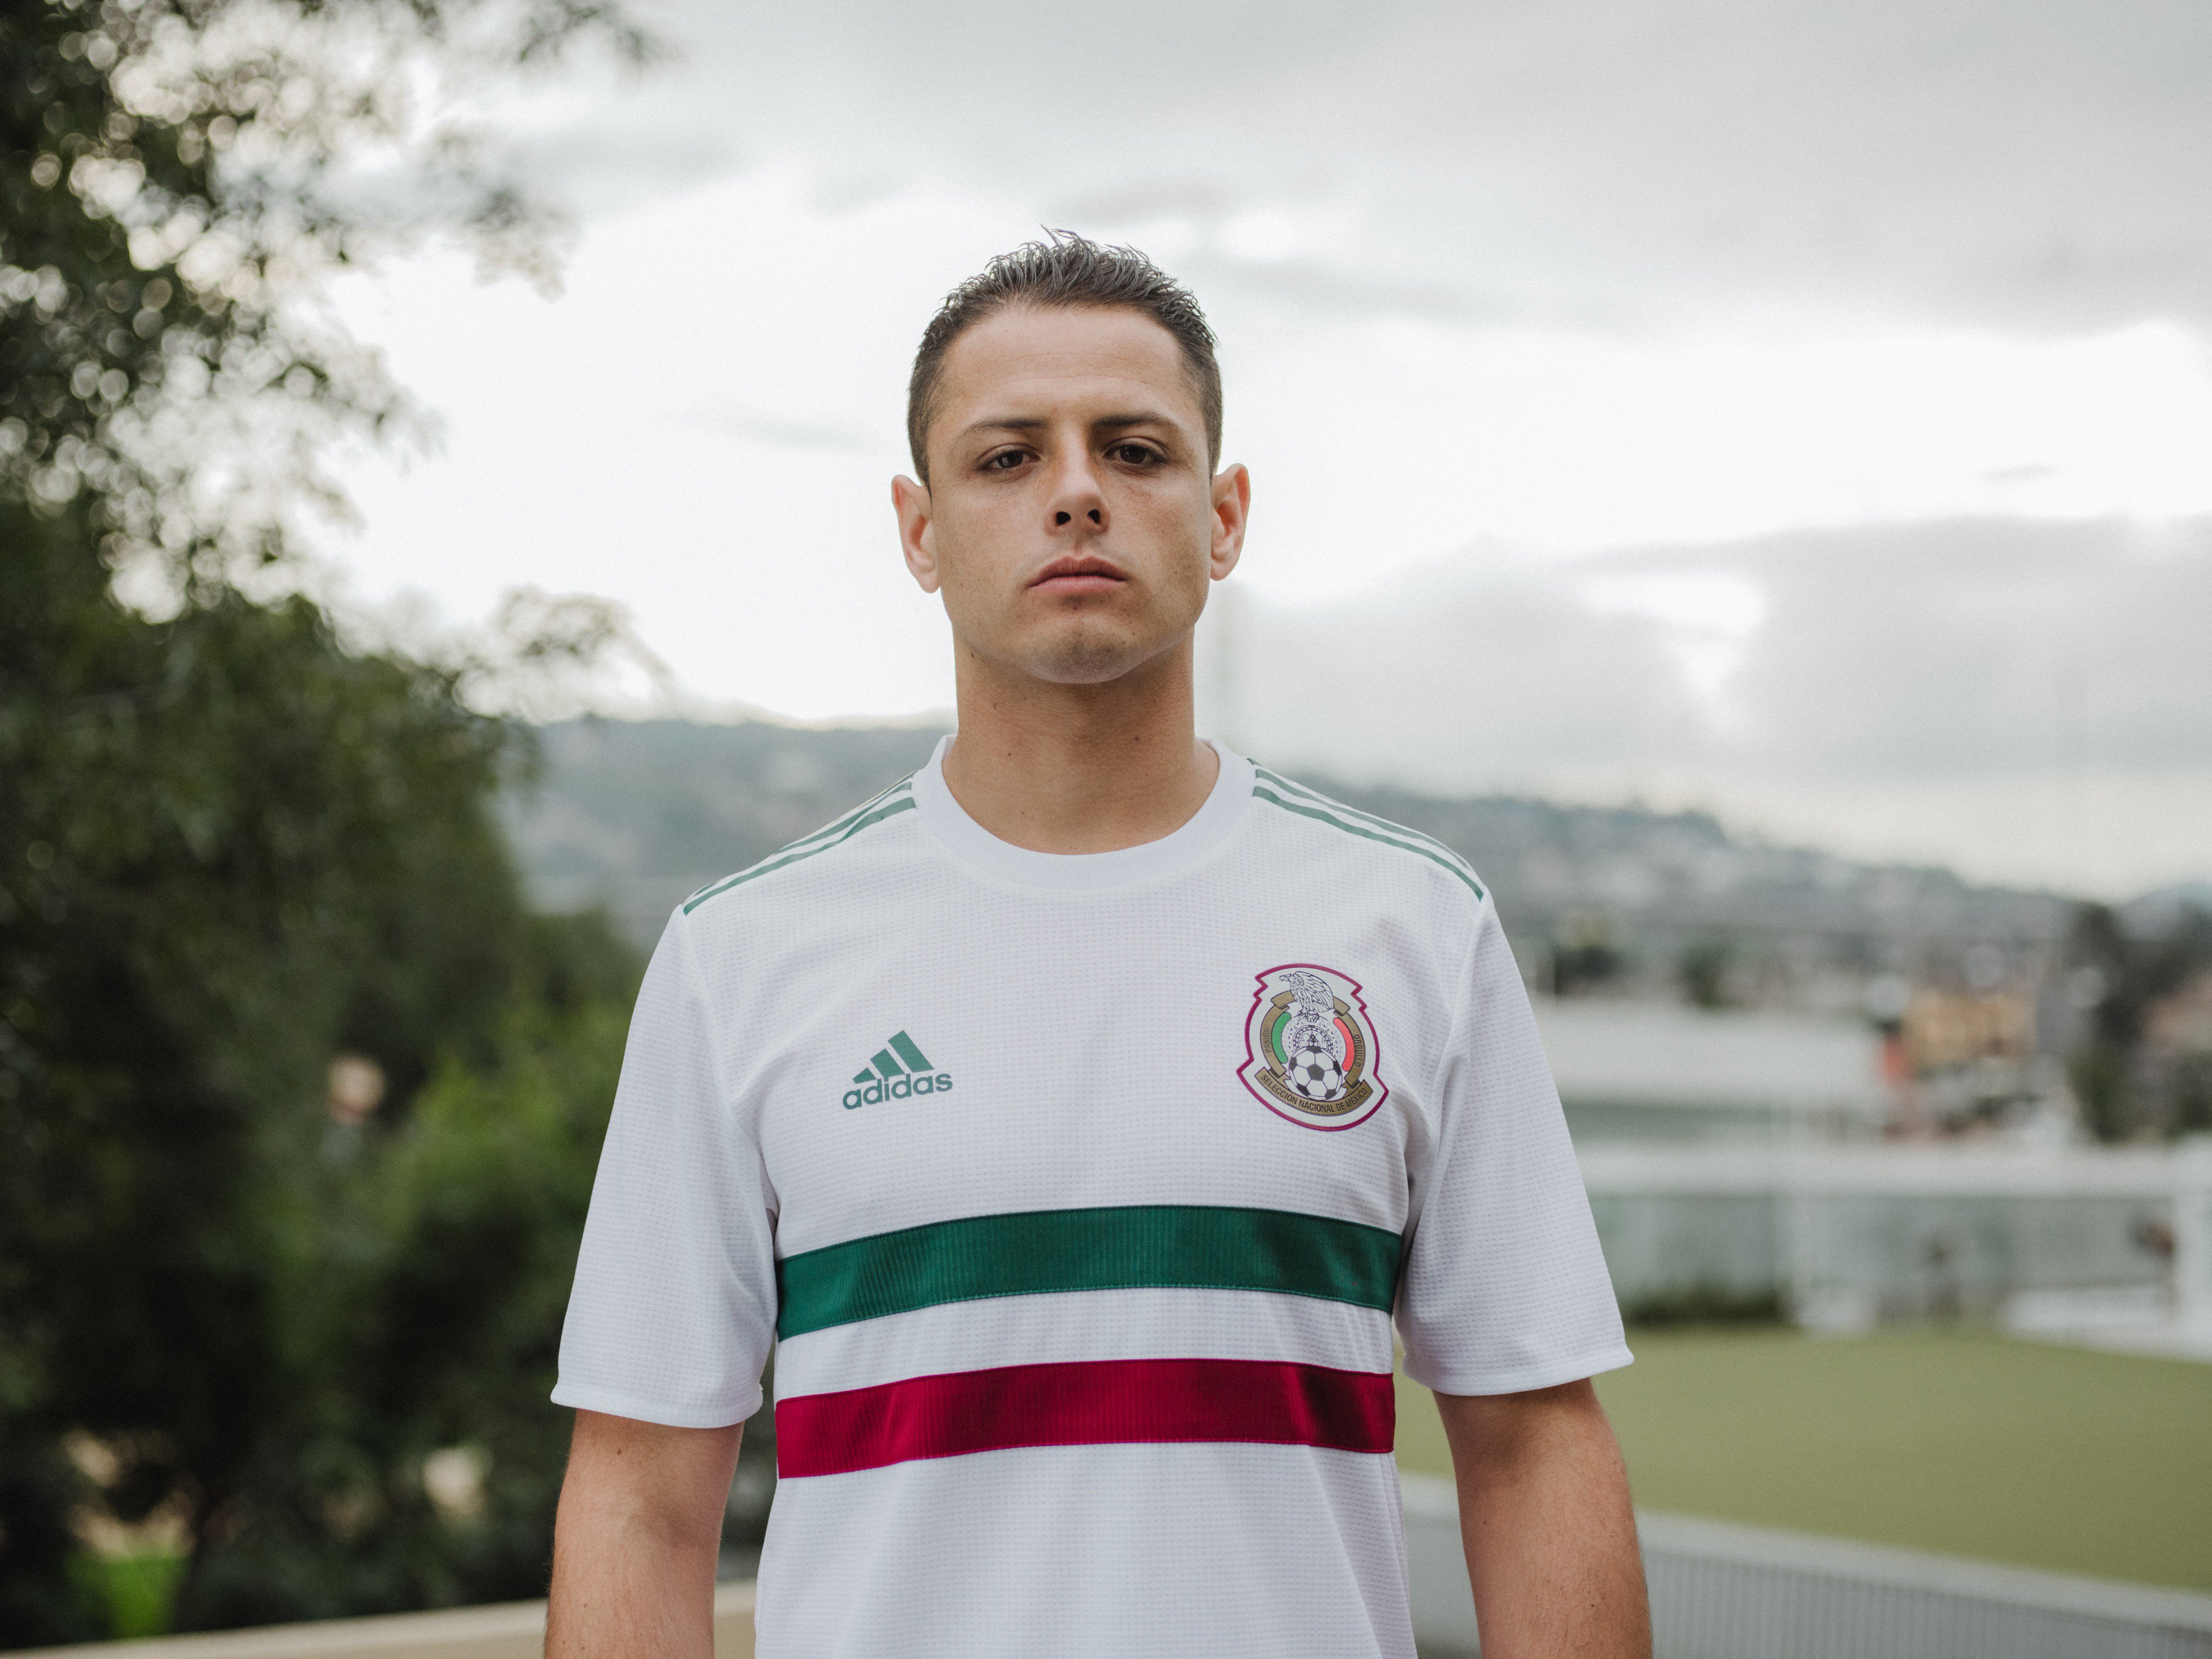 adidas UK on Twitter: the 2018 @fifaworldcup Away jerseys for Spain, Mexico and Japan. Exclusively available now in store and online here: https://t.co/cJXOkBUI1v #HereToCreate https://t.co/SFtwfzVFOz" Twitter